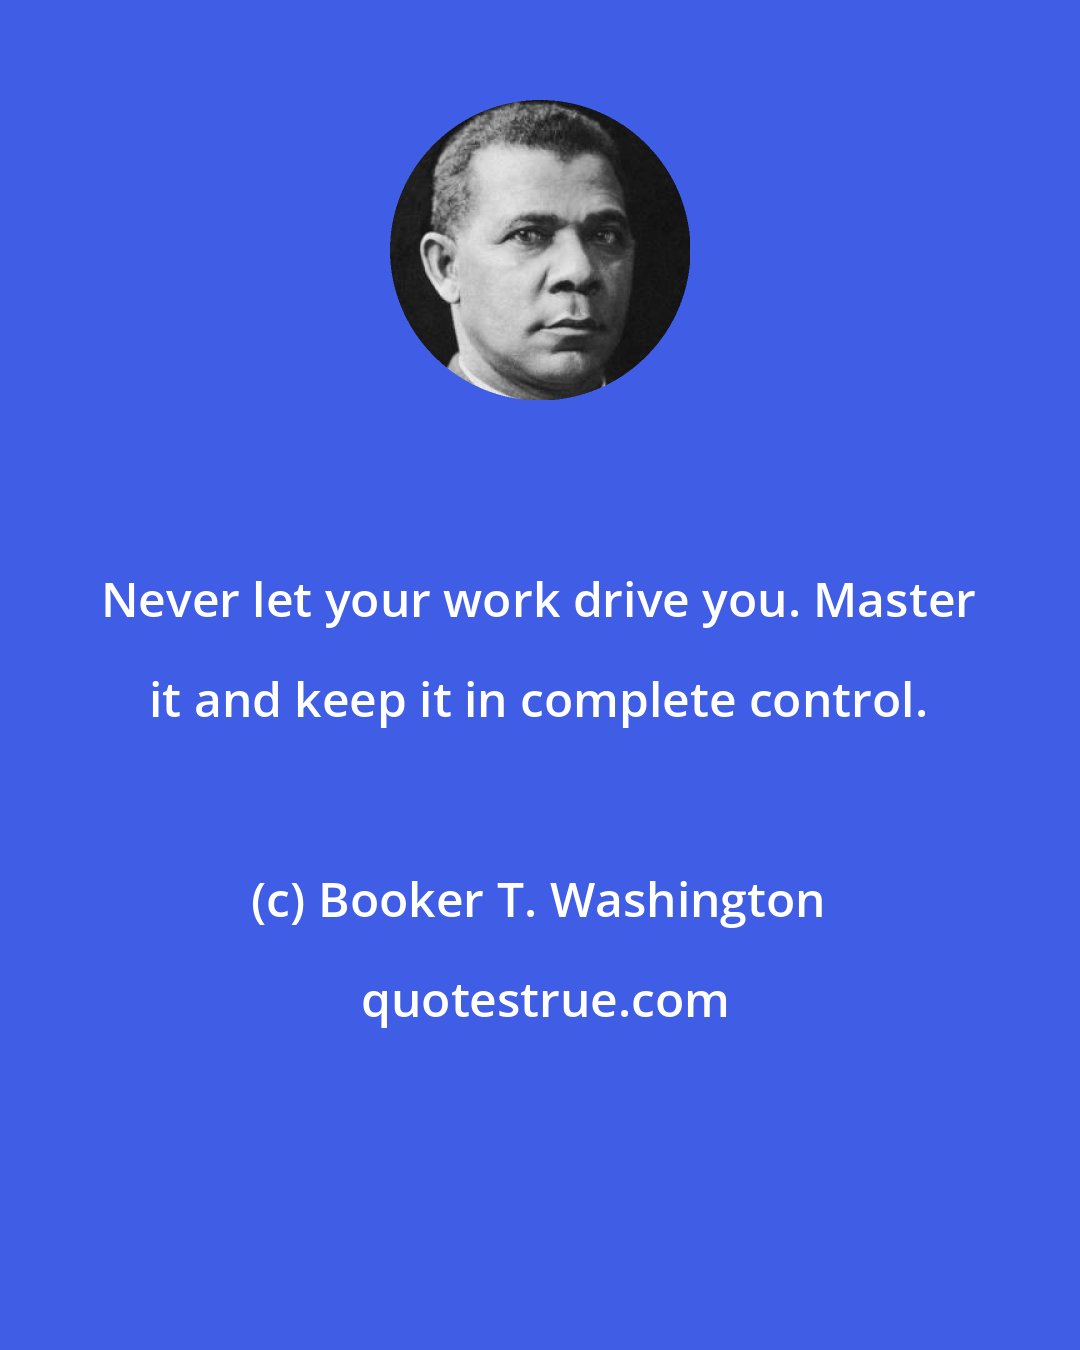 Booker T. Washington: Never let your work drive you. Master it and keep it in complete control.